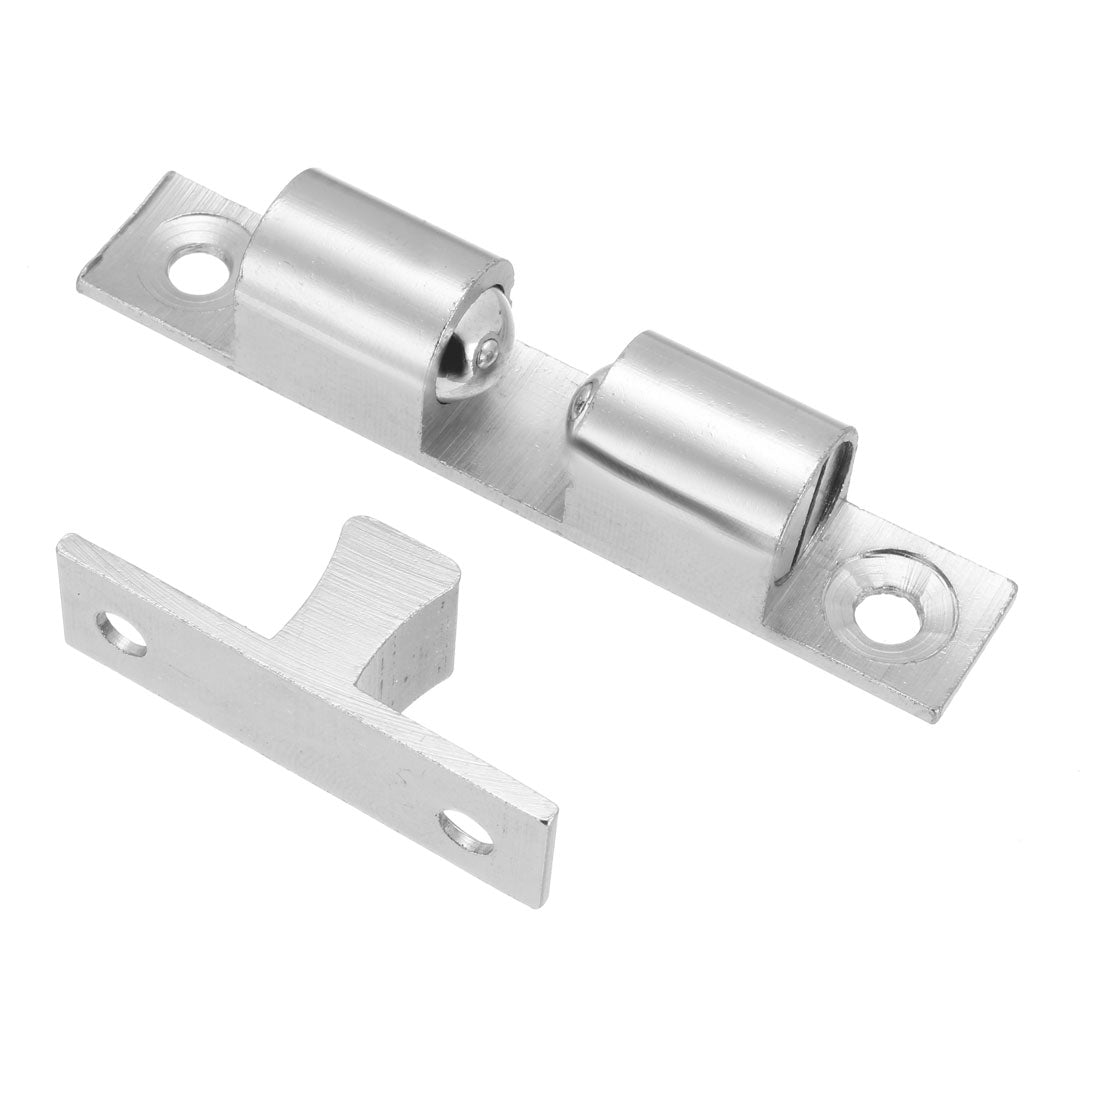 uxcell Uxcell 2pcs Cabinet Door Closet Brass Double Ball Catch Tension Latch 70mm Length Silver Tone